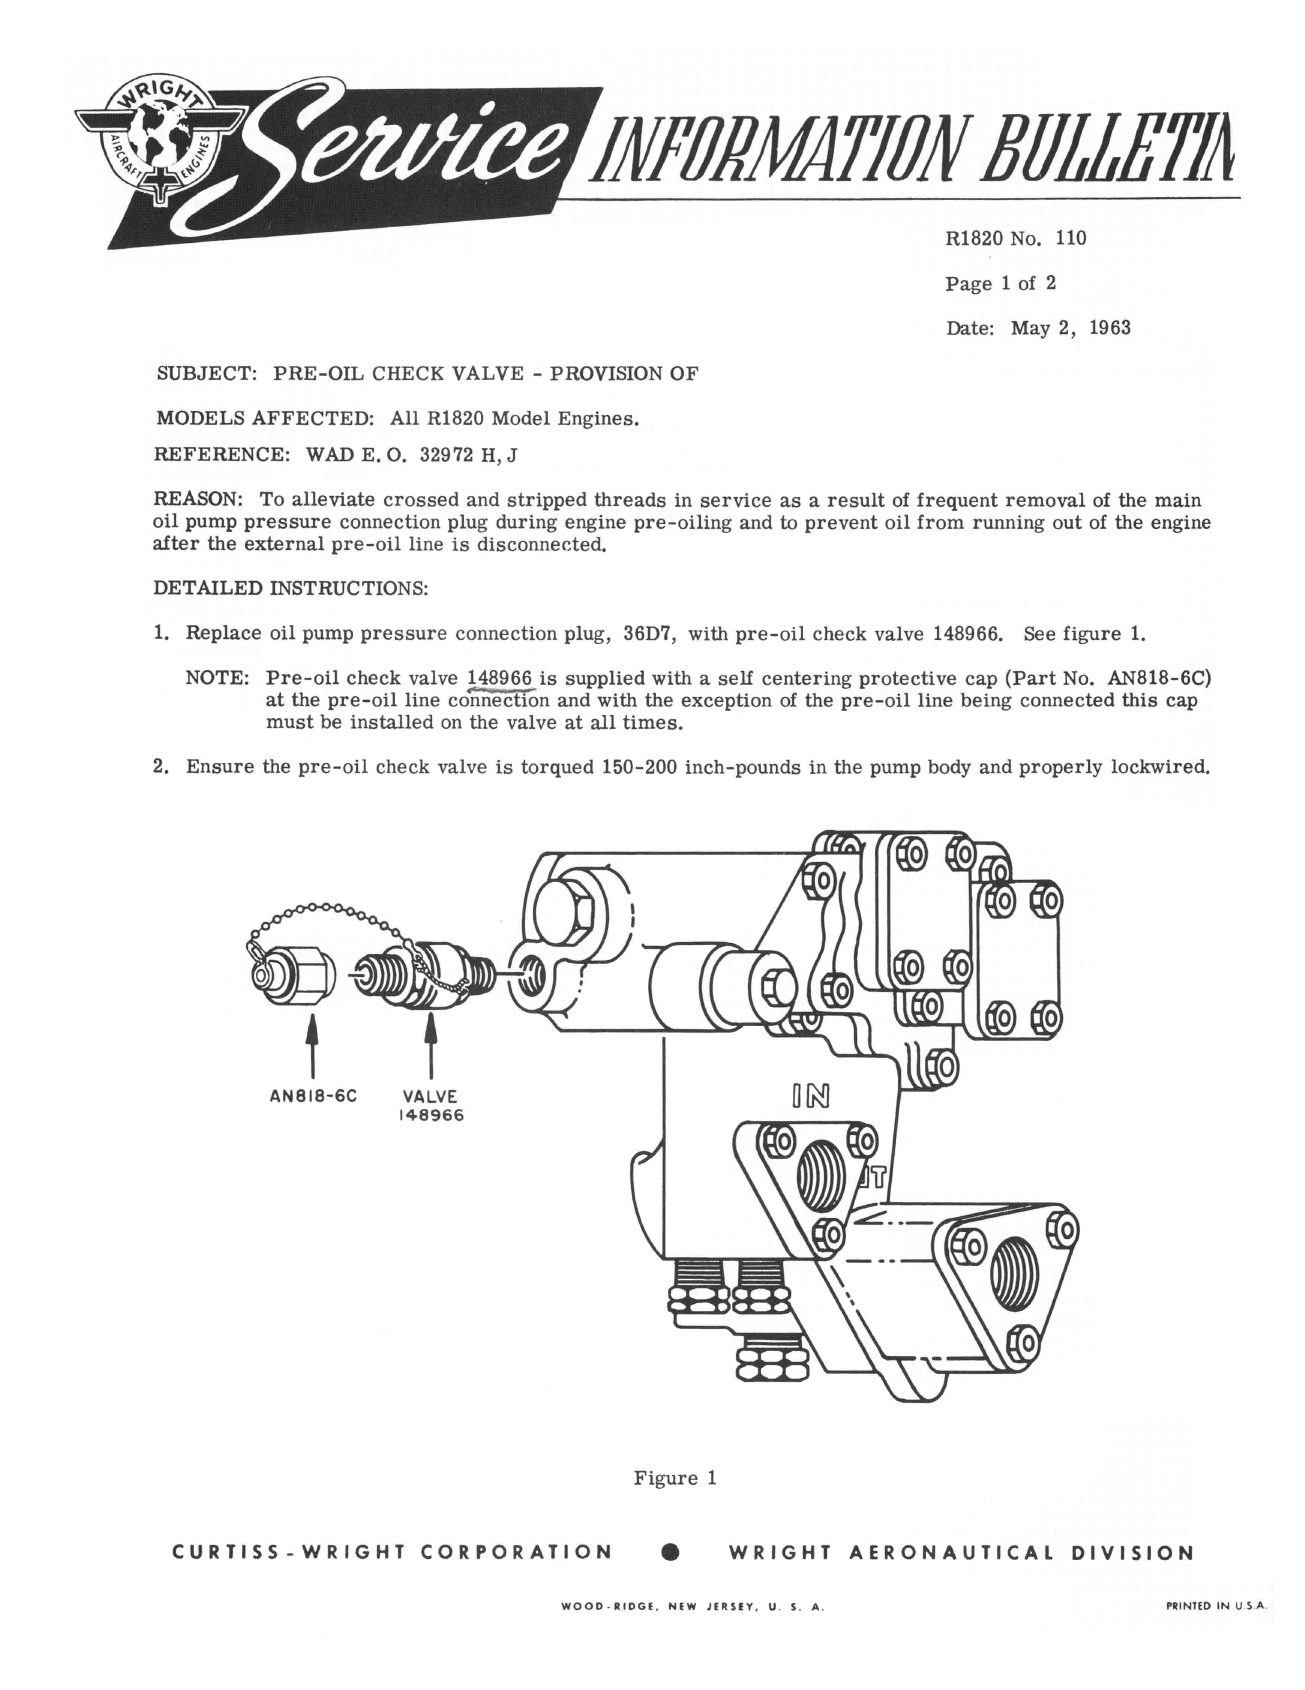 Sample page 1 from AirCorps Library document: Provision of Pre-Oil Check Valve